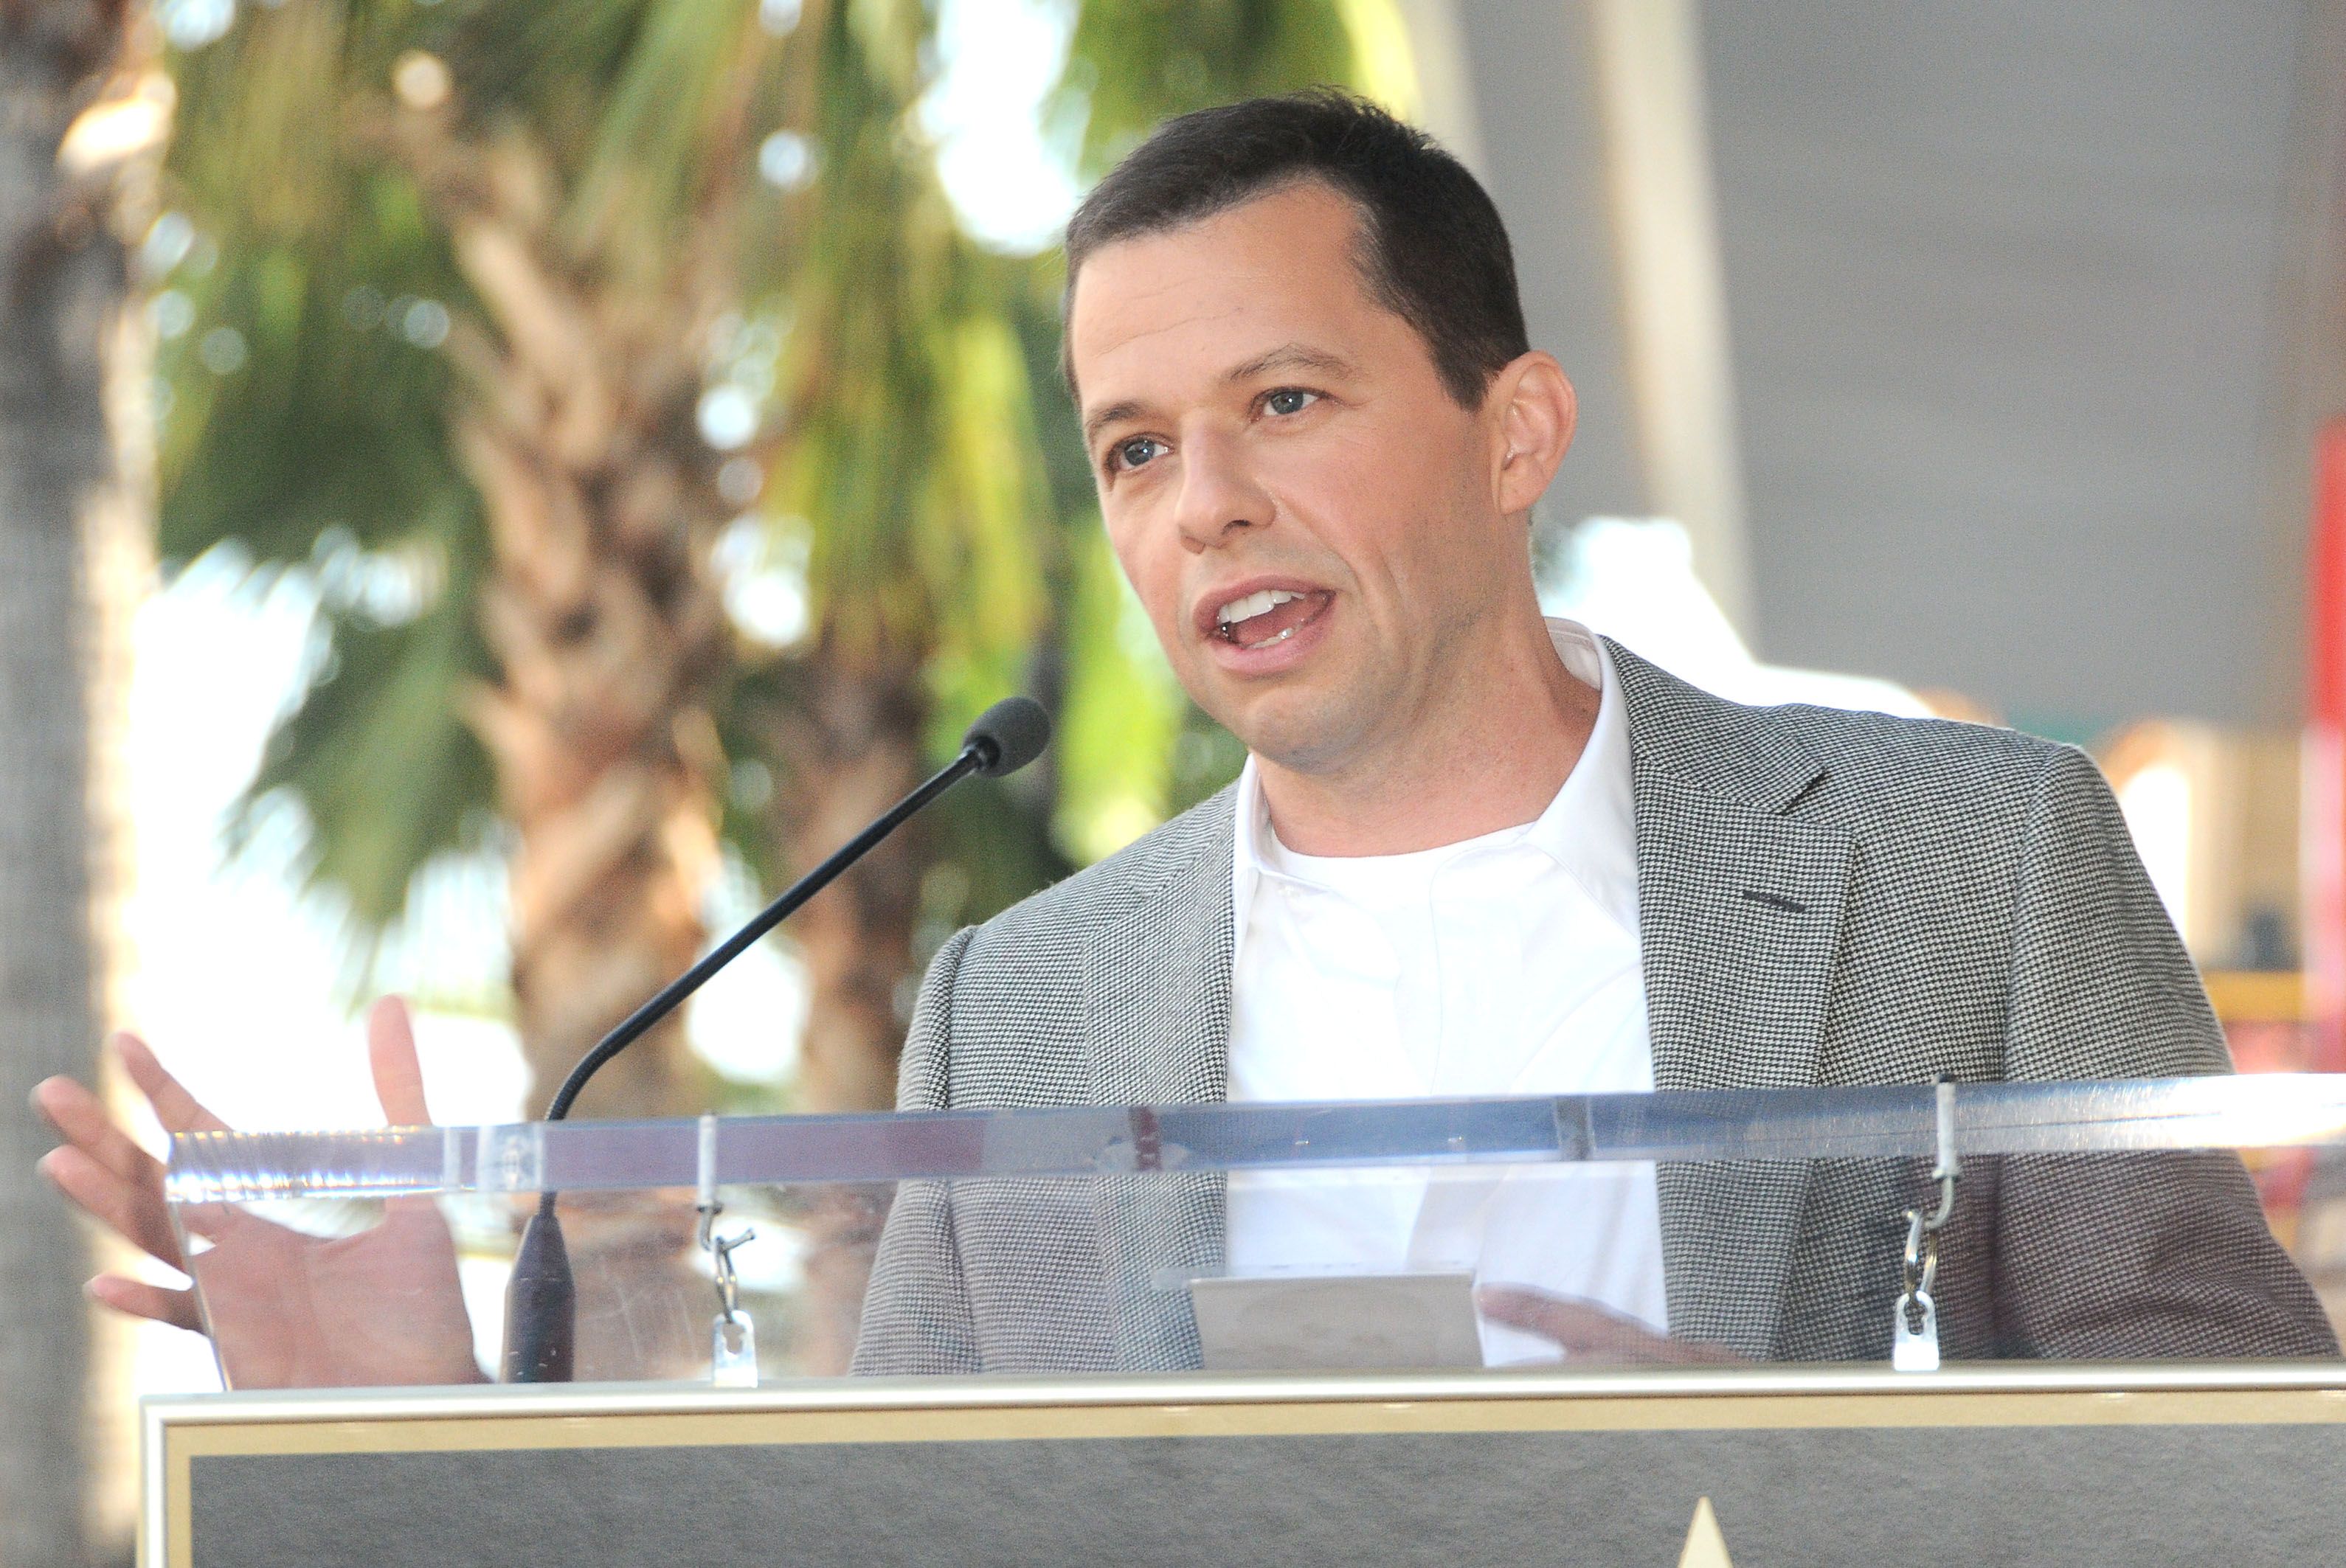 Jon Cryer Honored With A Star On The Hollywood Walk of Fame  09/2011